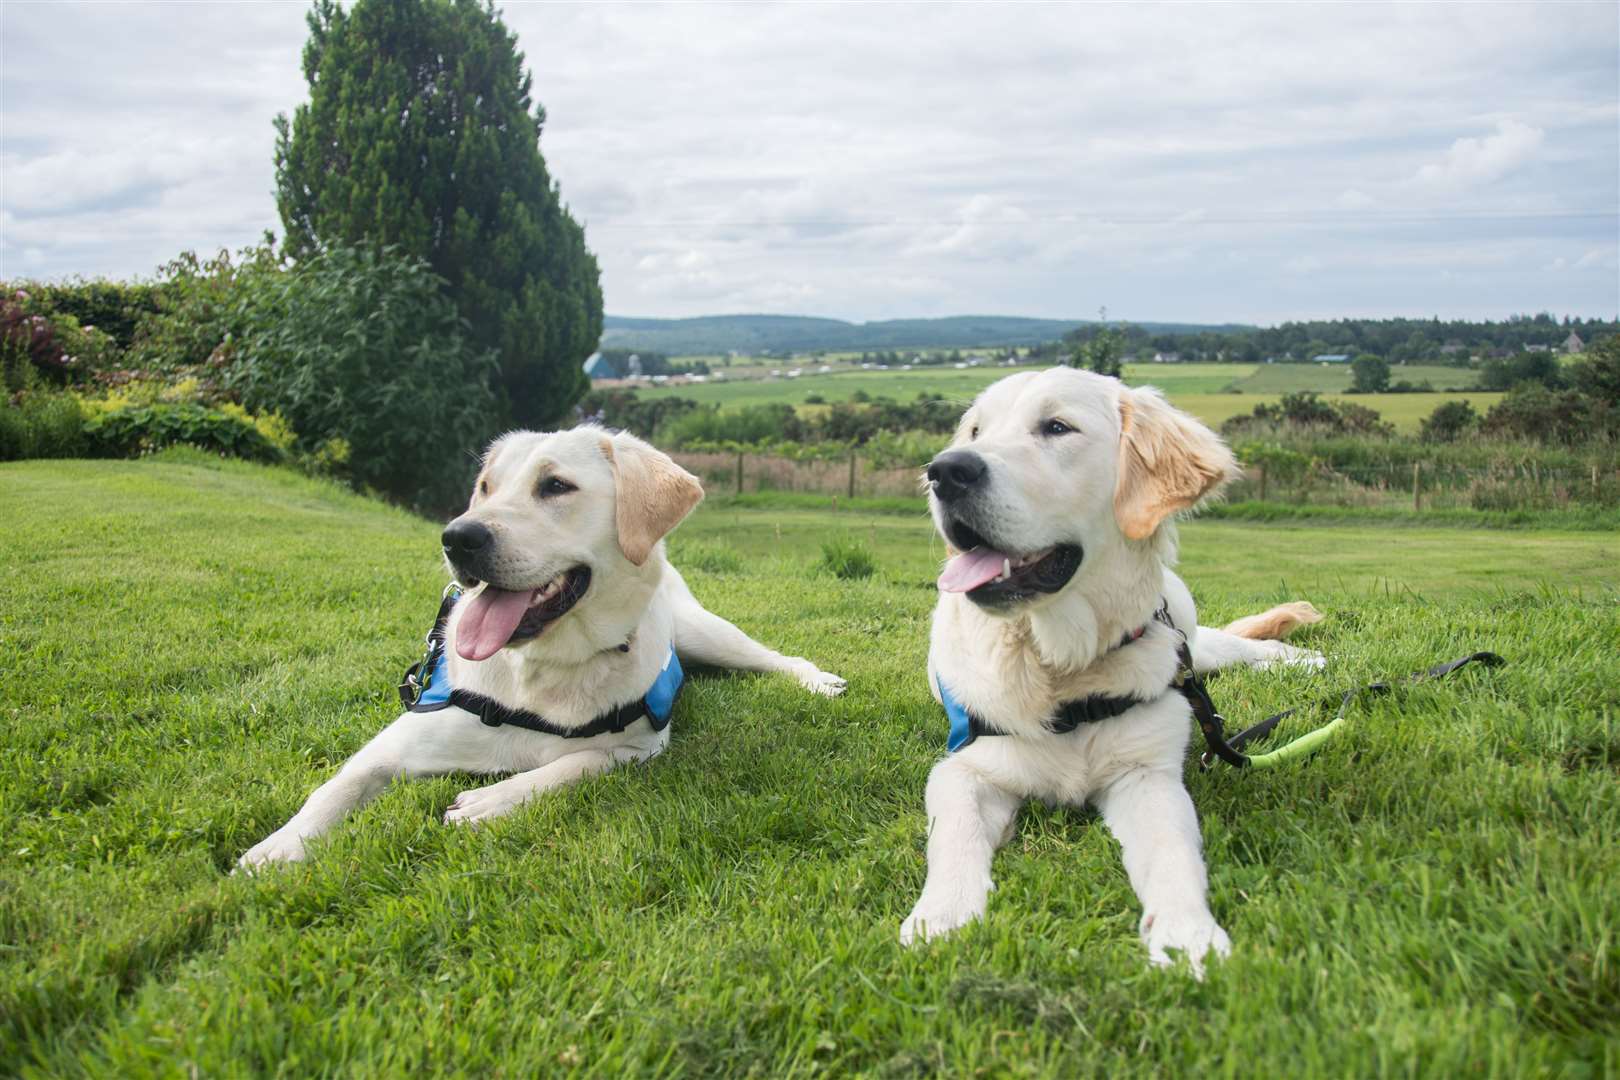 Bramble (L) a Labrador/Golden Retriever cross and Gizmo a Golden Retriever...Puppies in training to be Guide Dogs for the Blind. They have received their blue coats, reminding people not to distract them..Picture: Becky Saunderson. Image No. 044441.